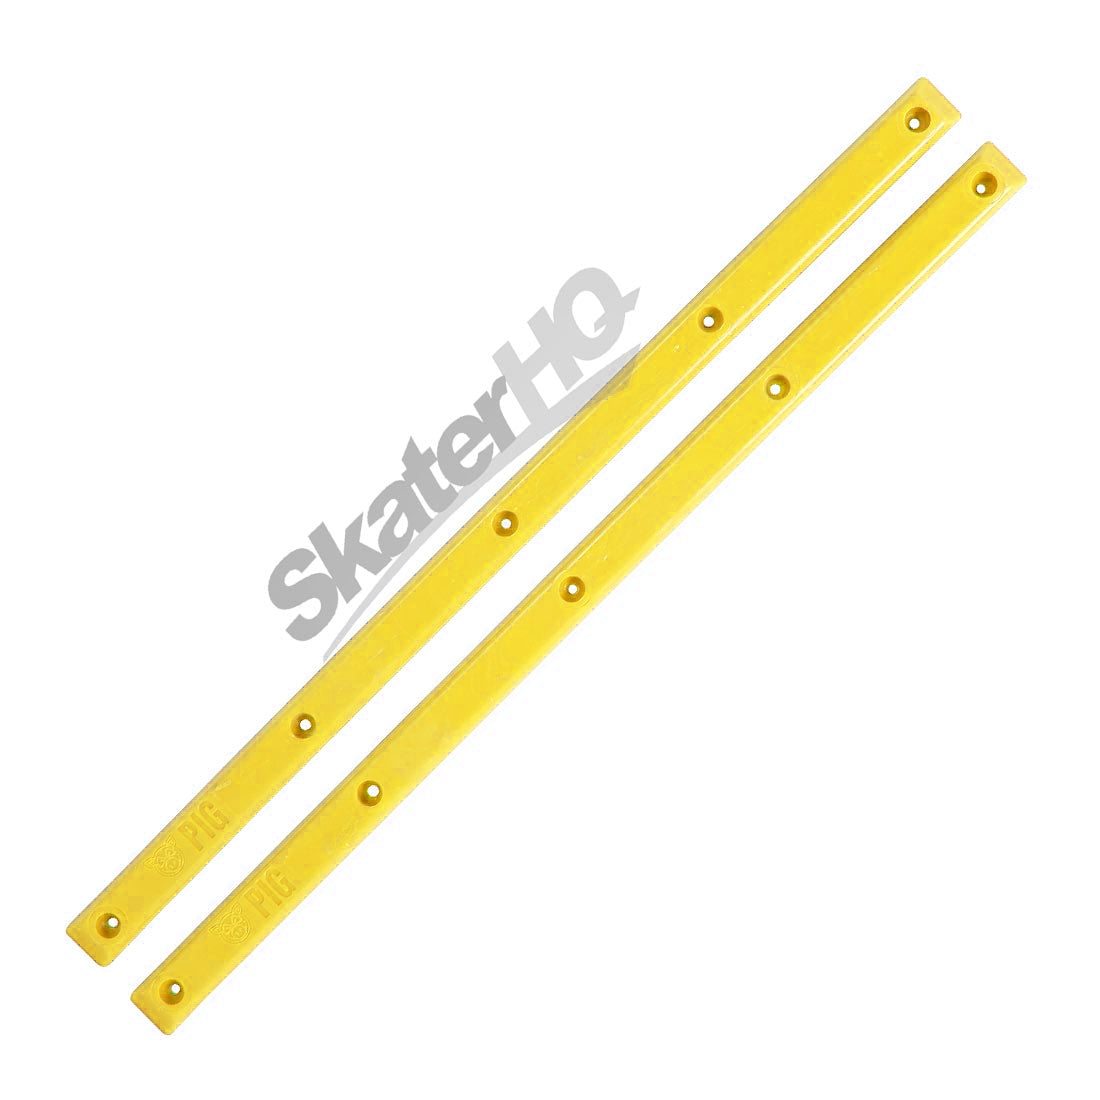 PIG Rails - Yellow Skateboard Hardware and Parts